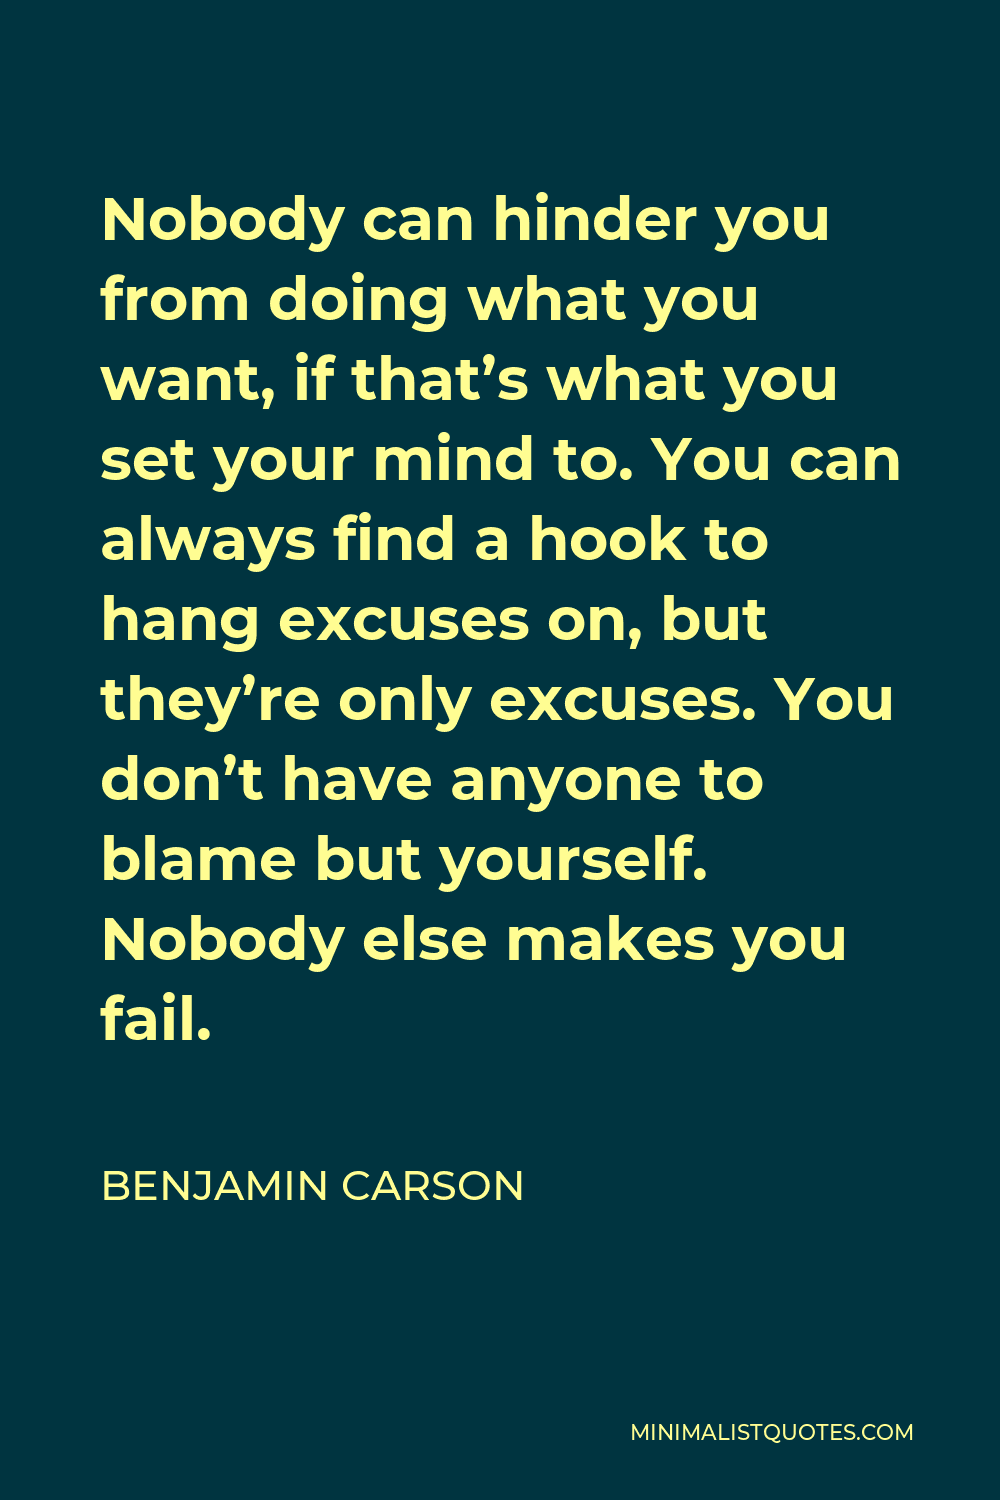 Benjamin Carson Quote - Nobody can hinder you from doing what you want, if that’s what you set your mind to. You can always find a hook to hang excuses on, but they’re only excuses. You don’t have anyone to blame but yourself. Nobody else makes you fail.